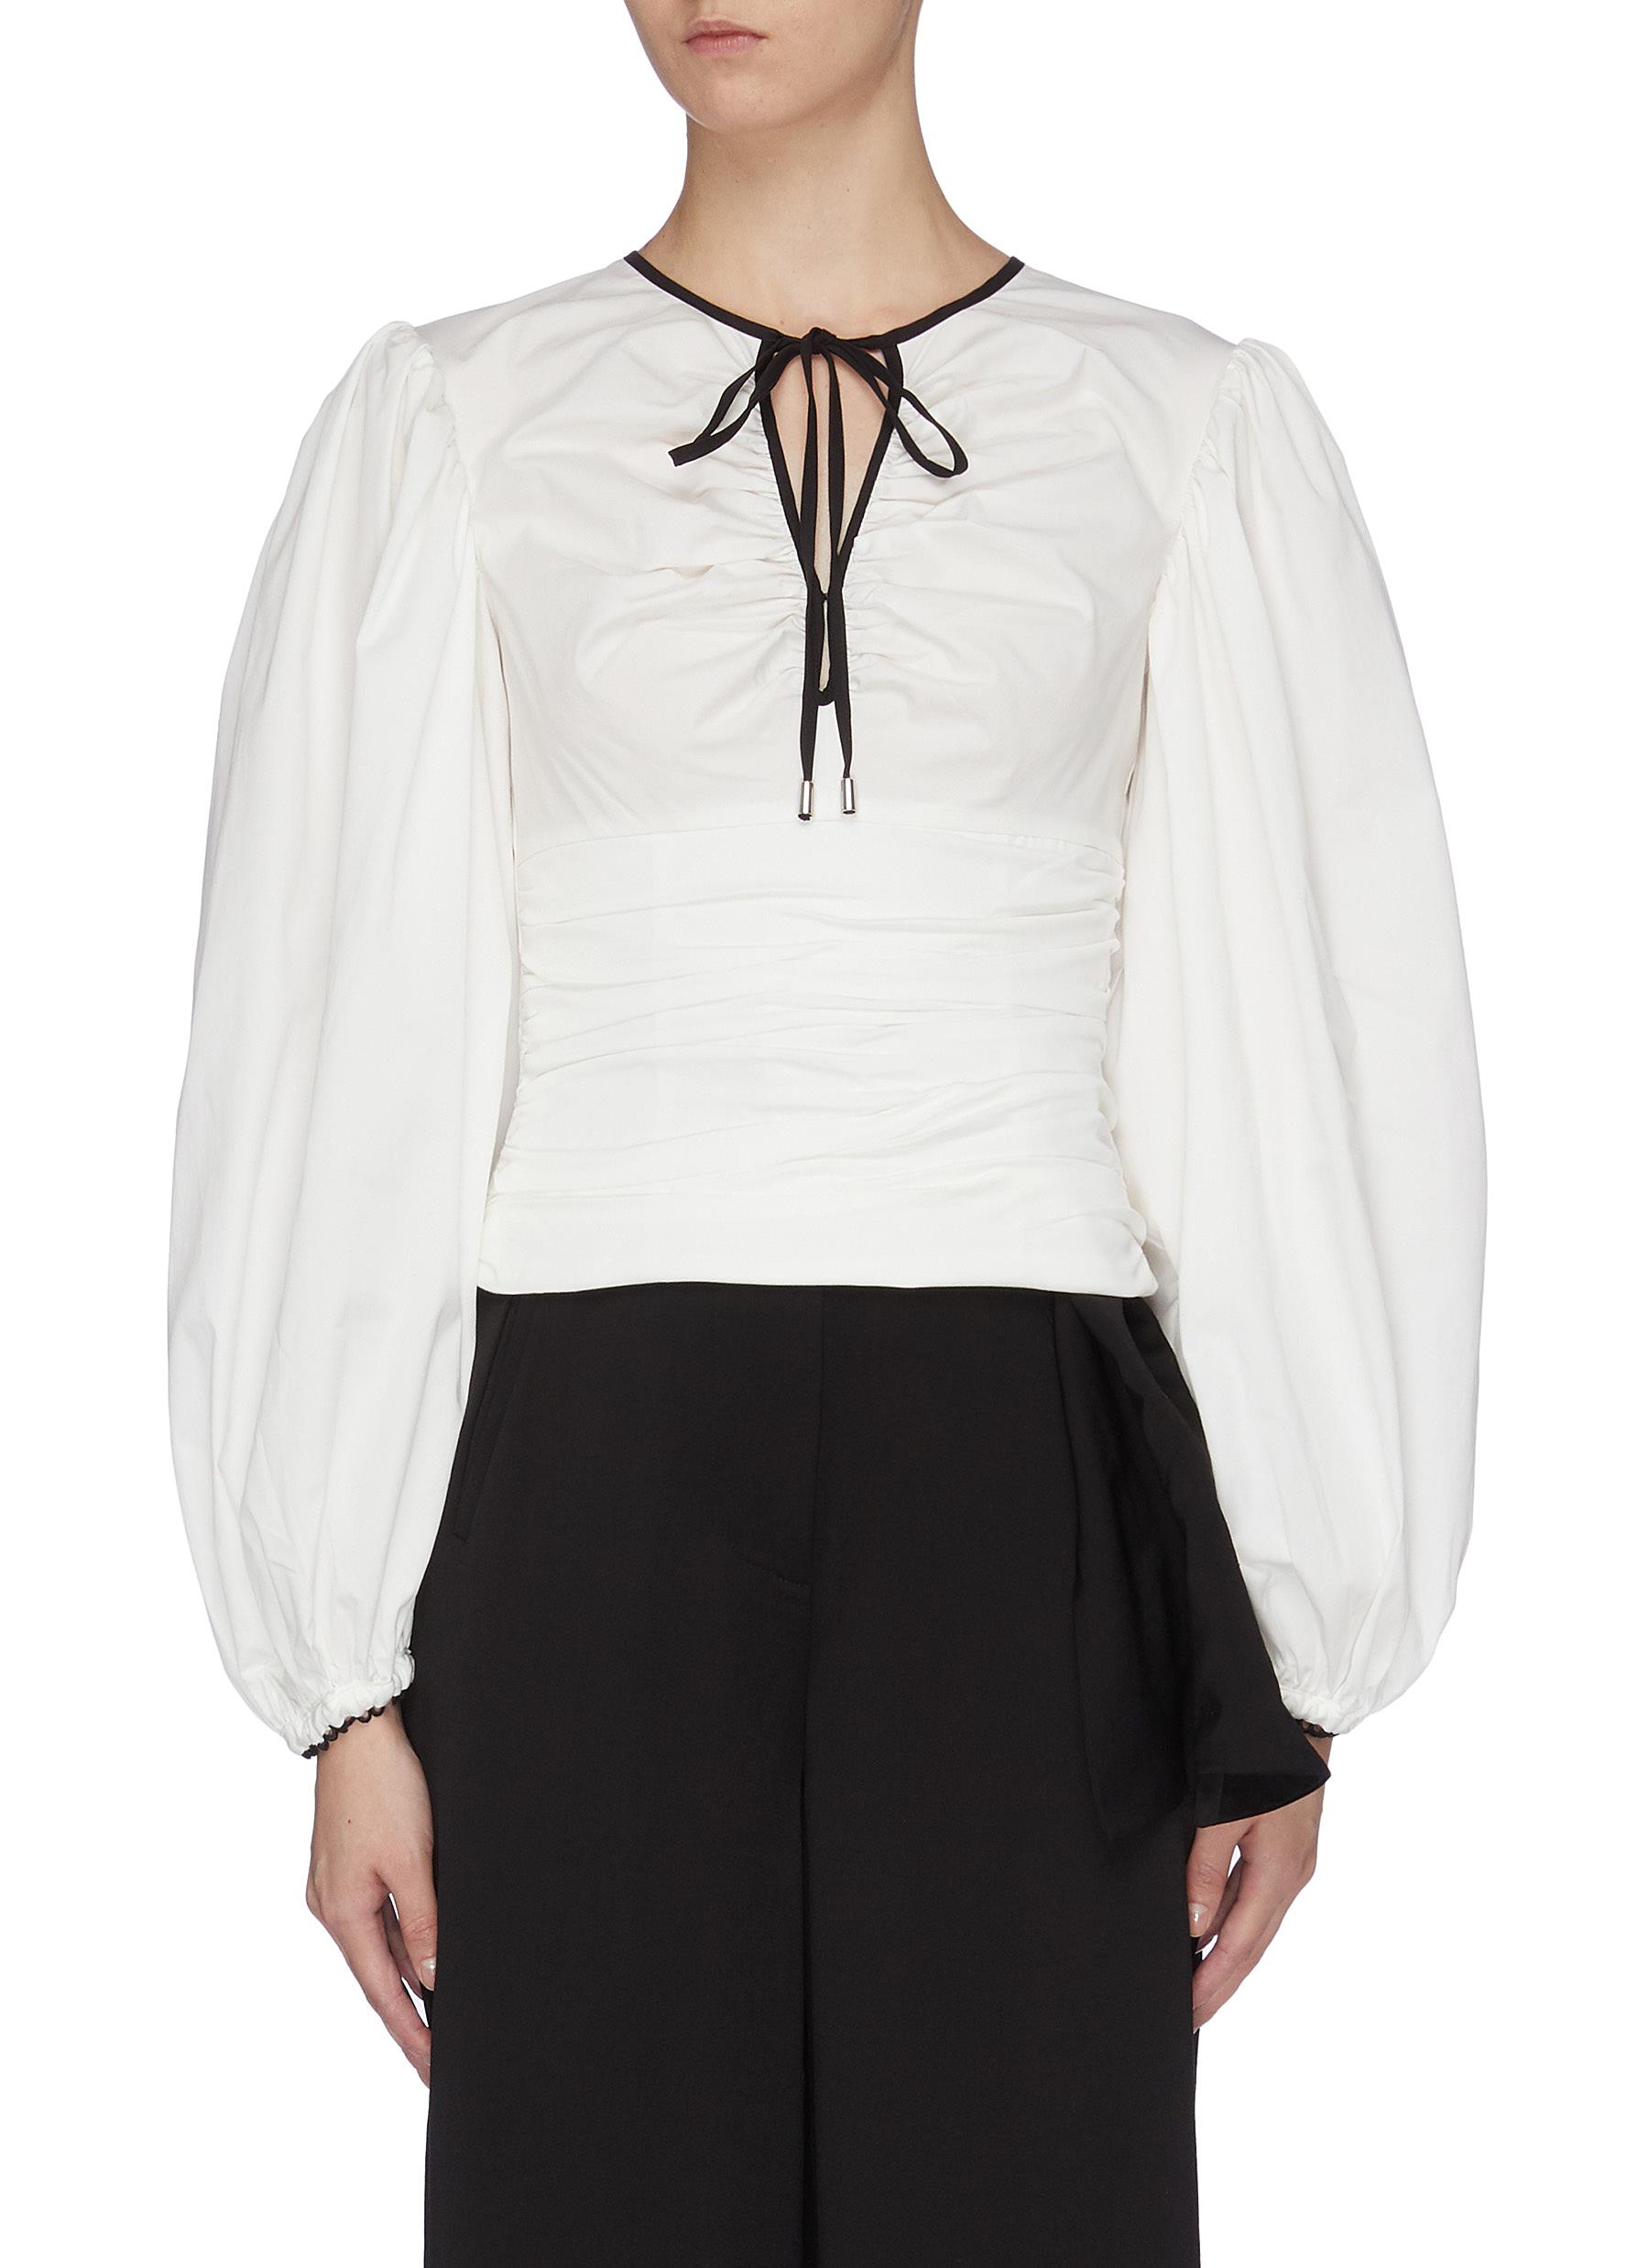 Keeping Time balloon sleeve ruched top by C/Meo Collective